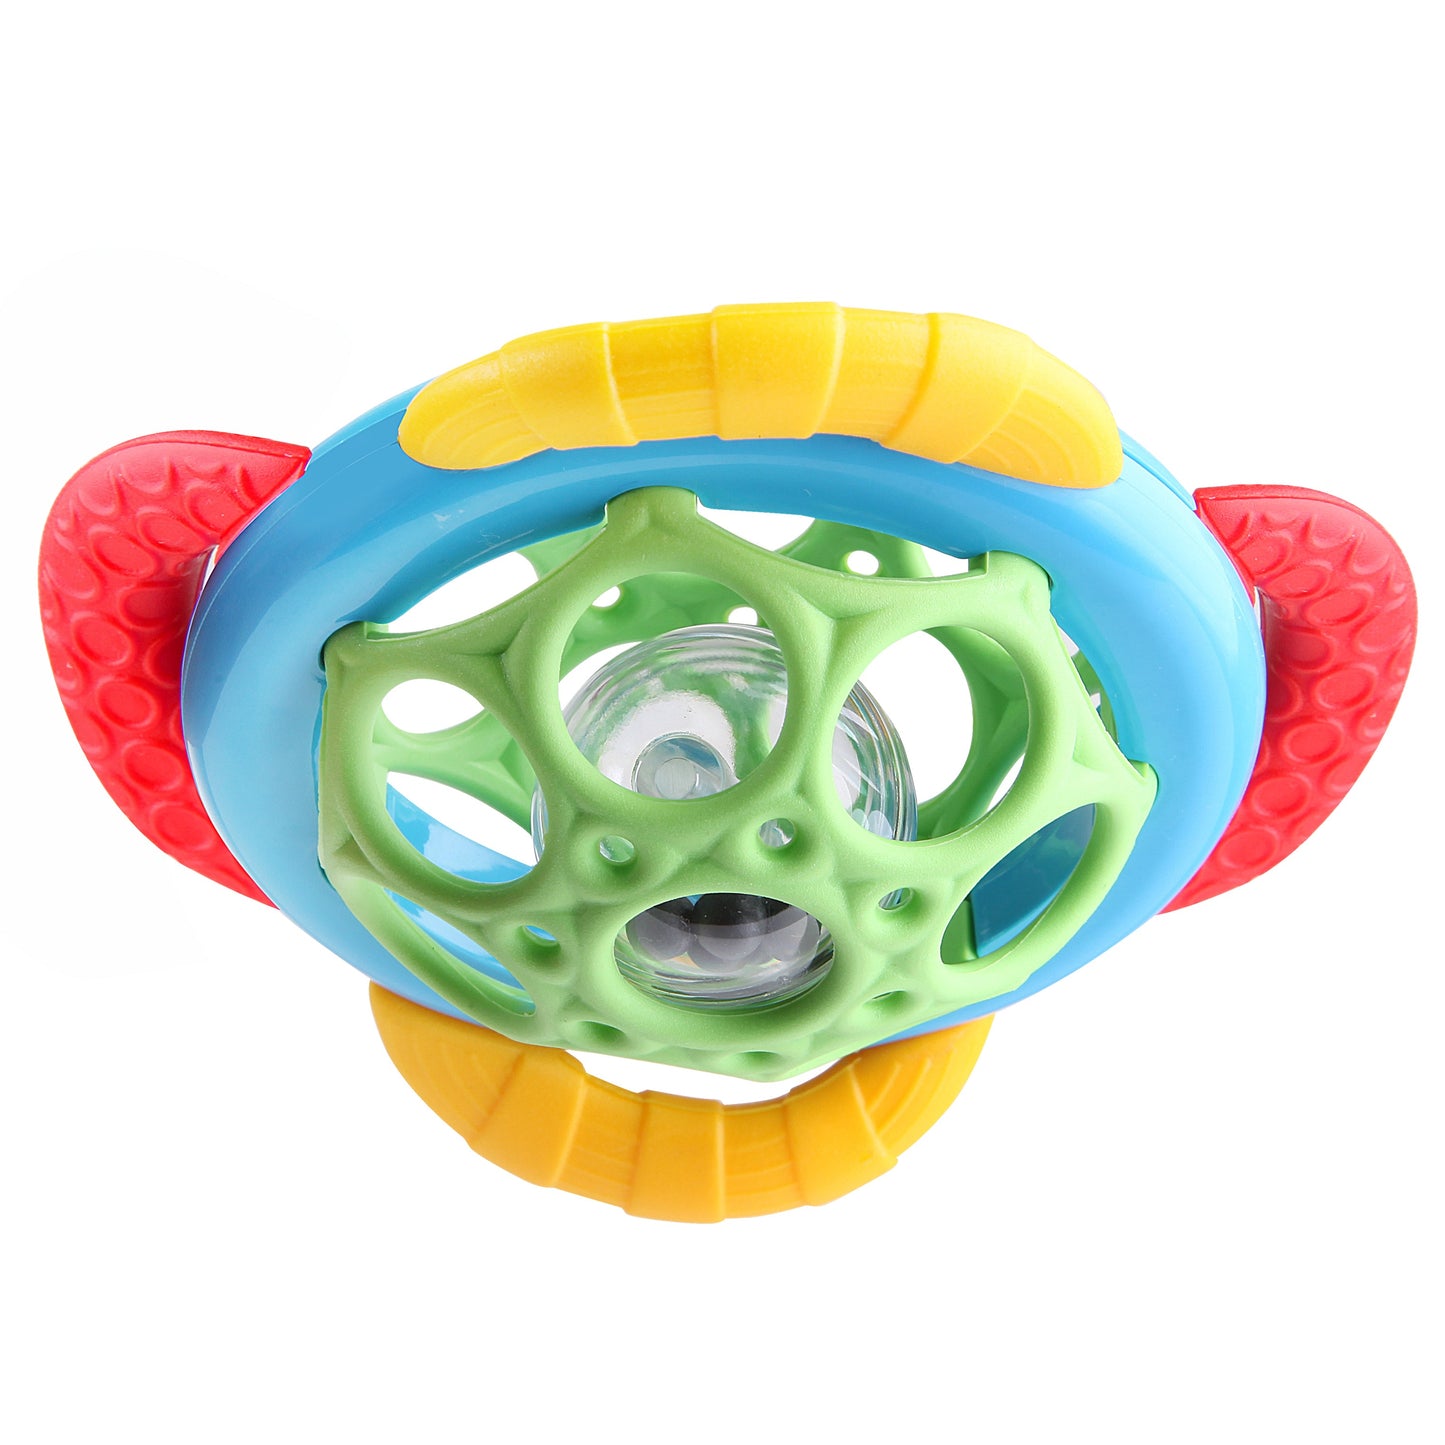 UFO Teether and Rattle Ball